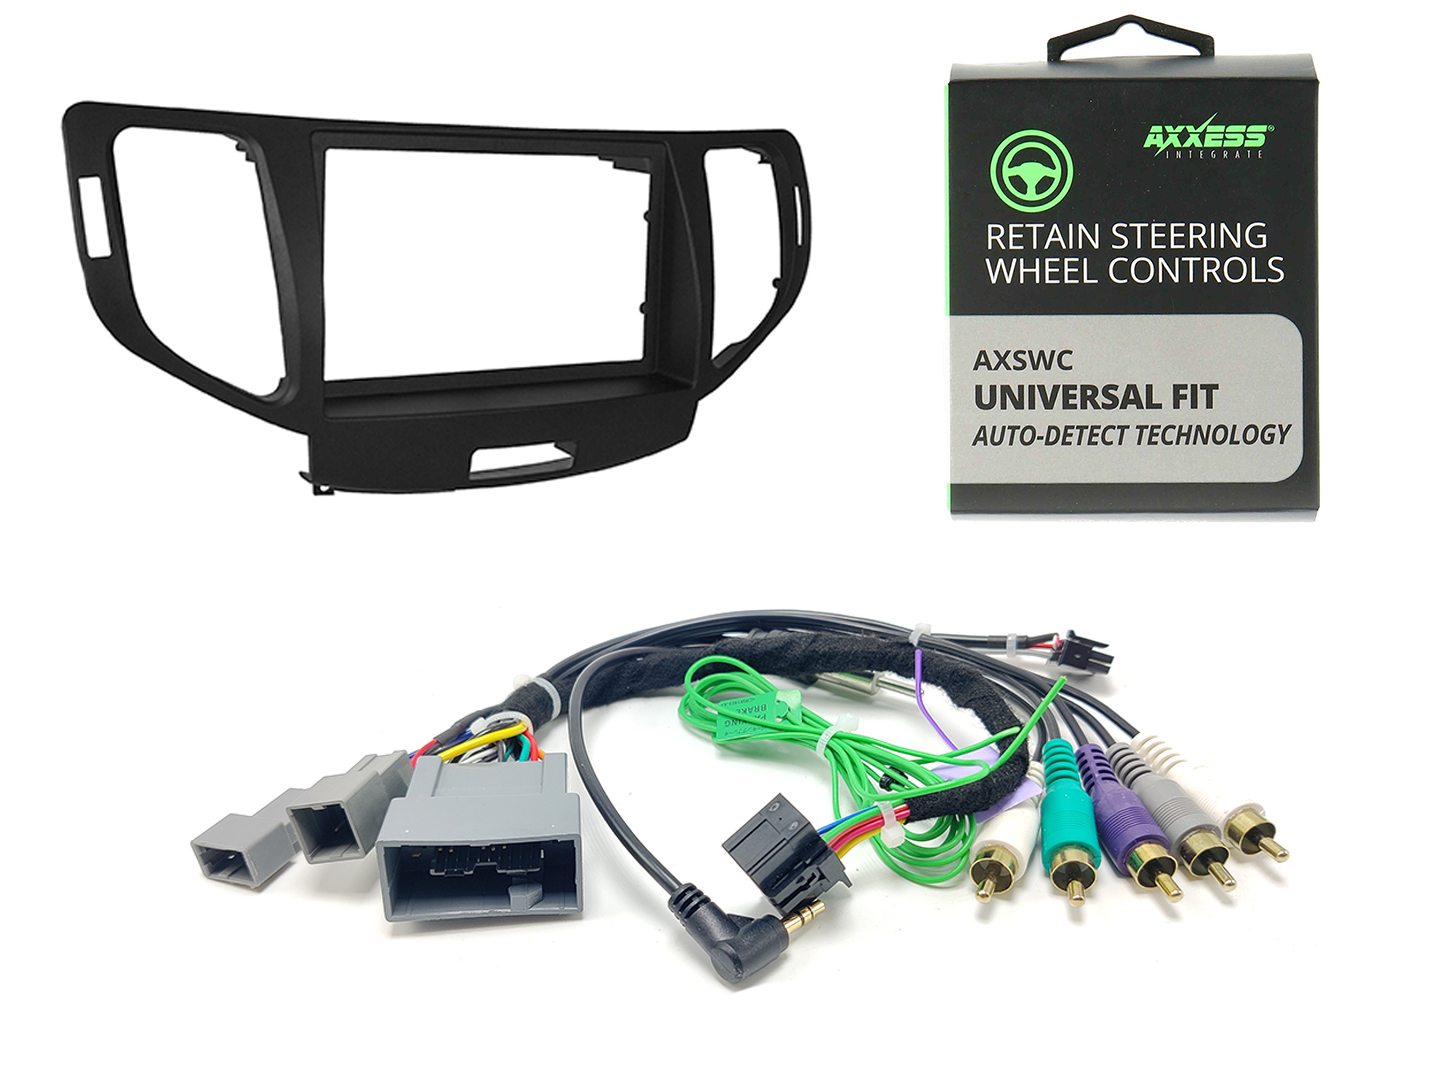 https://mobilemaxcaraudio.com/wp-content/uploads/2023/01/2009-acura-tsx-complete-kit.jpg